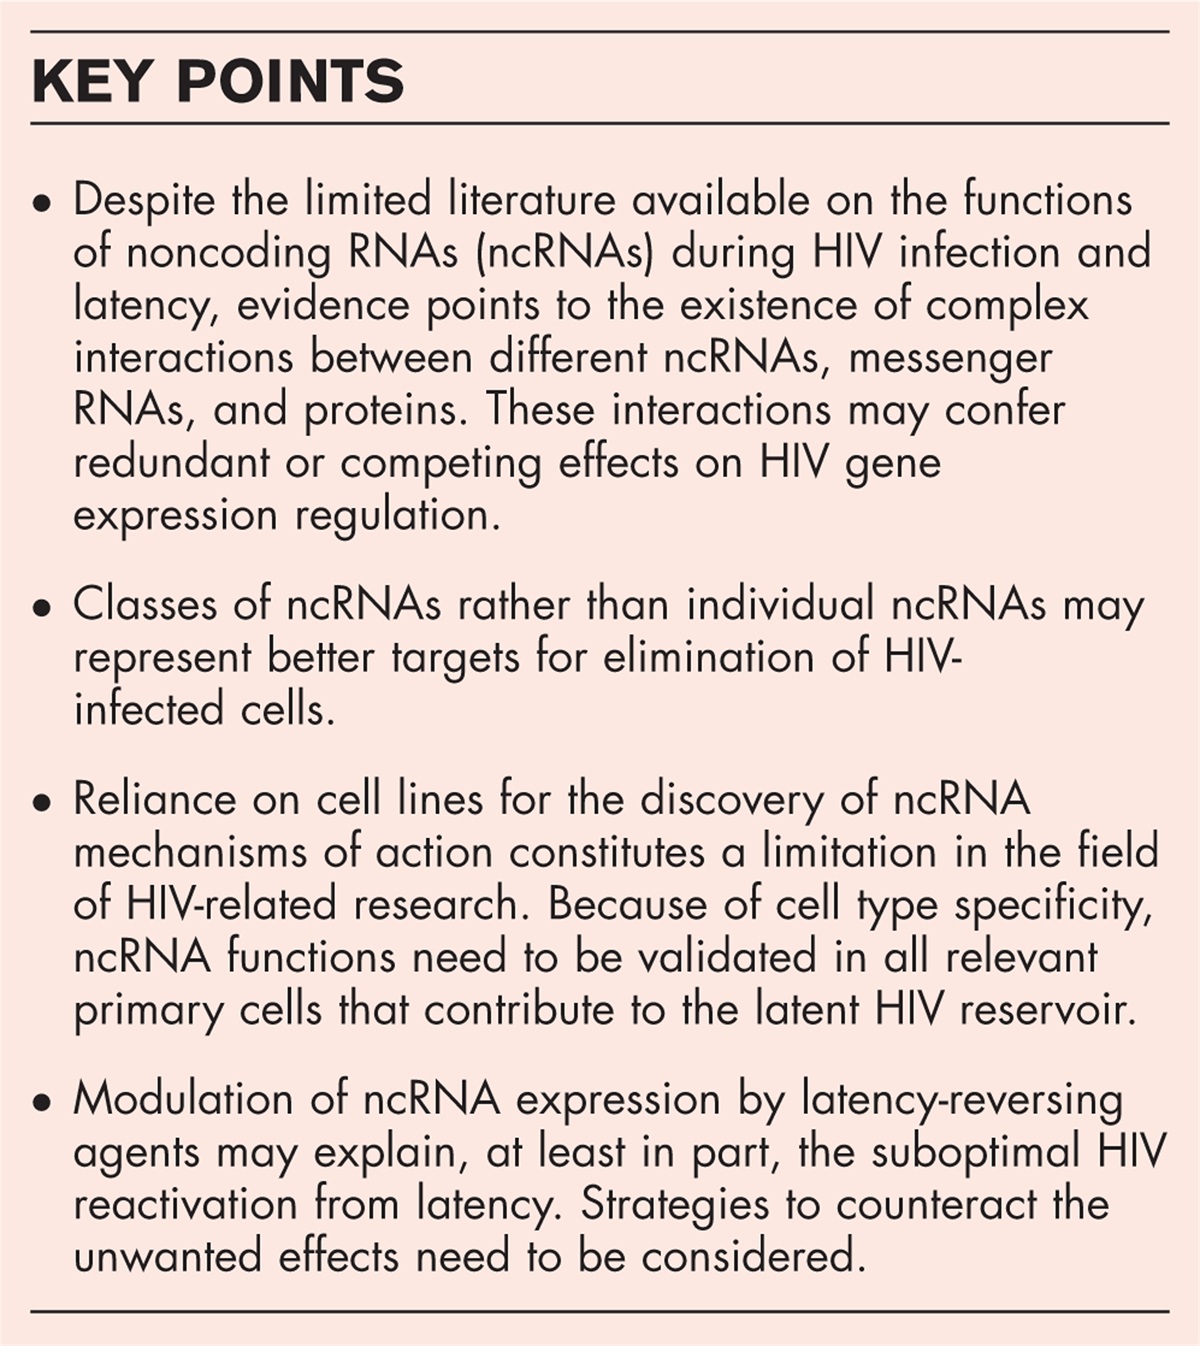 Targeting noncoding RNAs to reactivate or eliminate latent HIV reservoirs